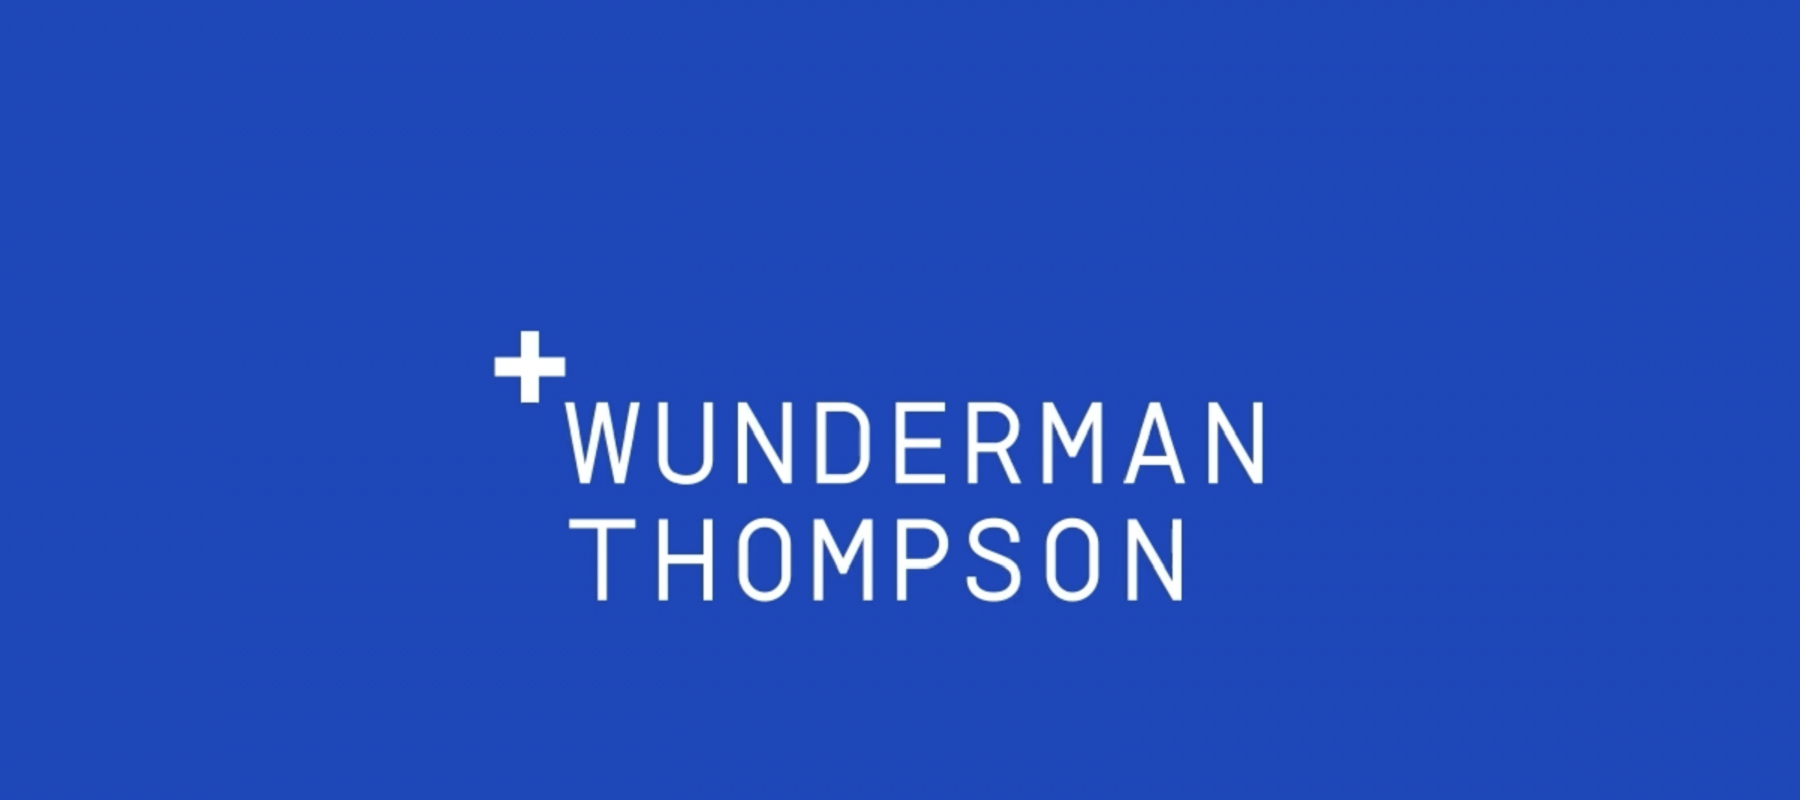 Wunderman Thompson Colombia and LifeCup campaign shortlisted in Glass Lions category